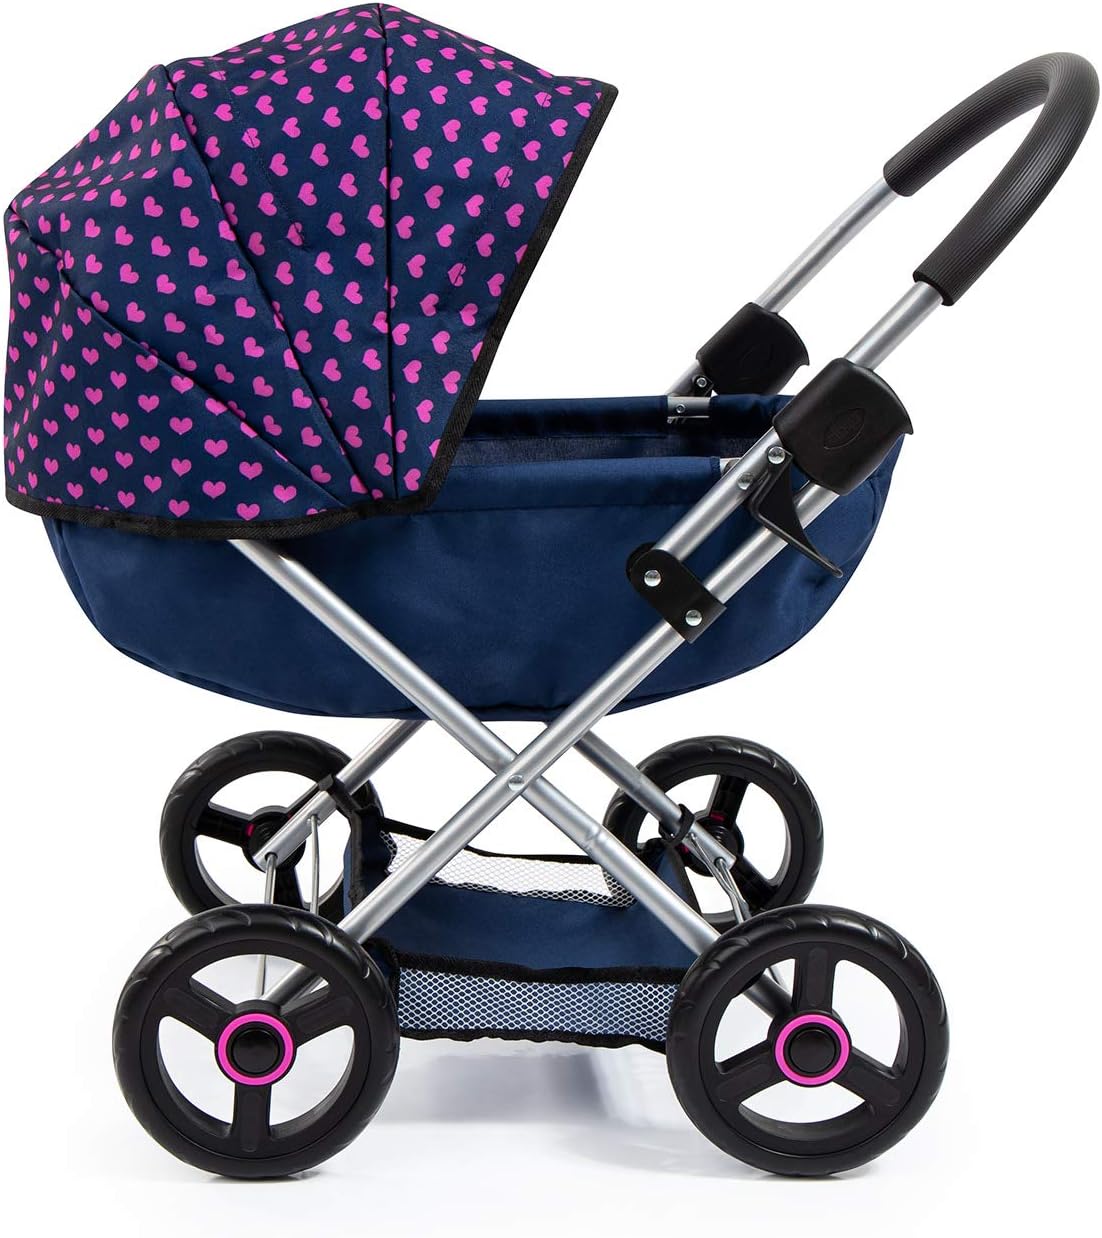 Bayer Dolls 4-in-1 Toy Baby Doll Pram Stroller Cosy Set - Dolls up to 18" (Blue/Purple) - image 7 of 10